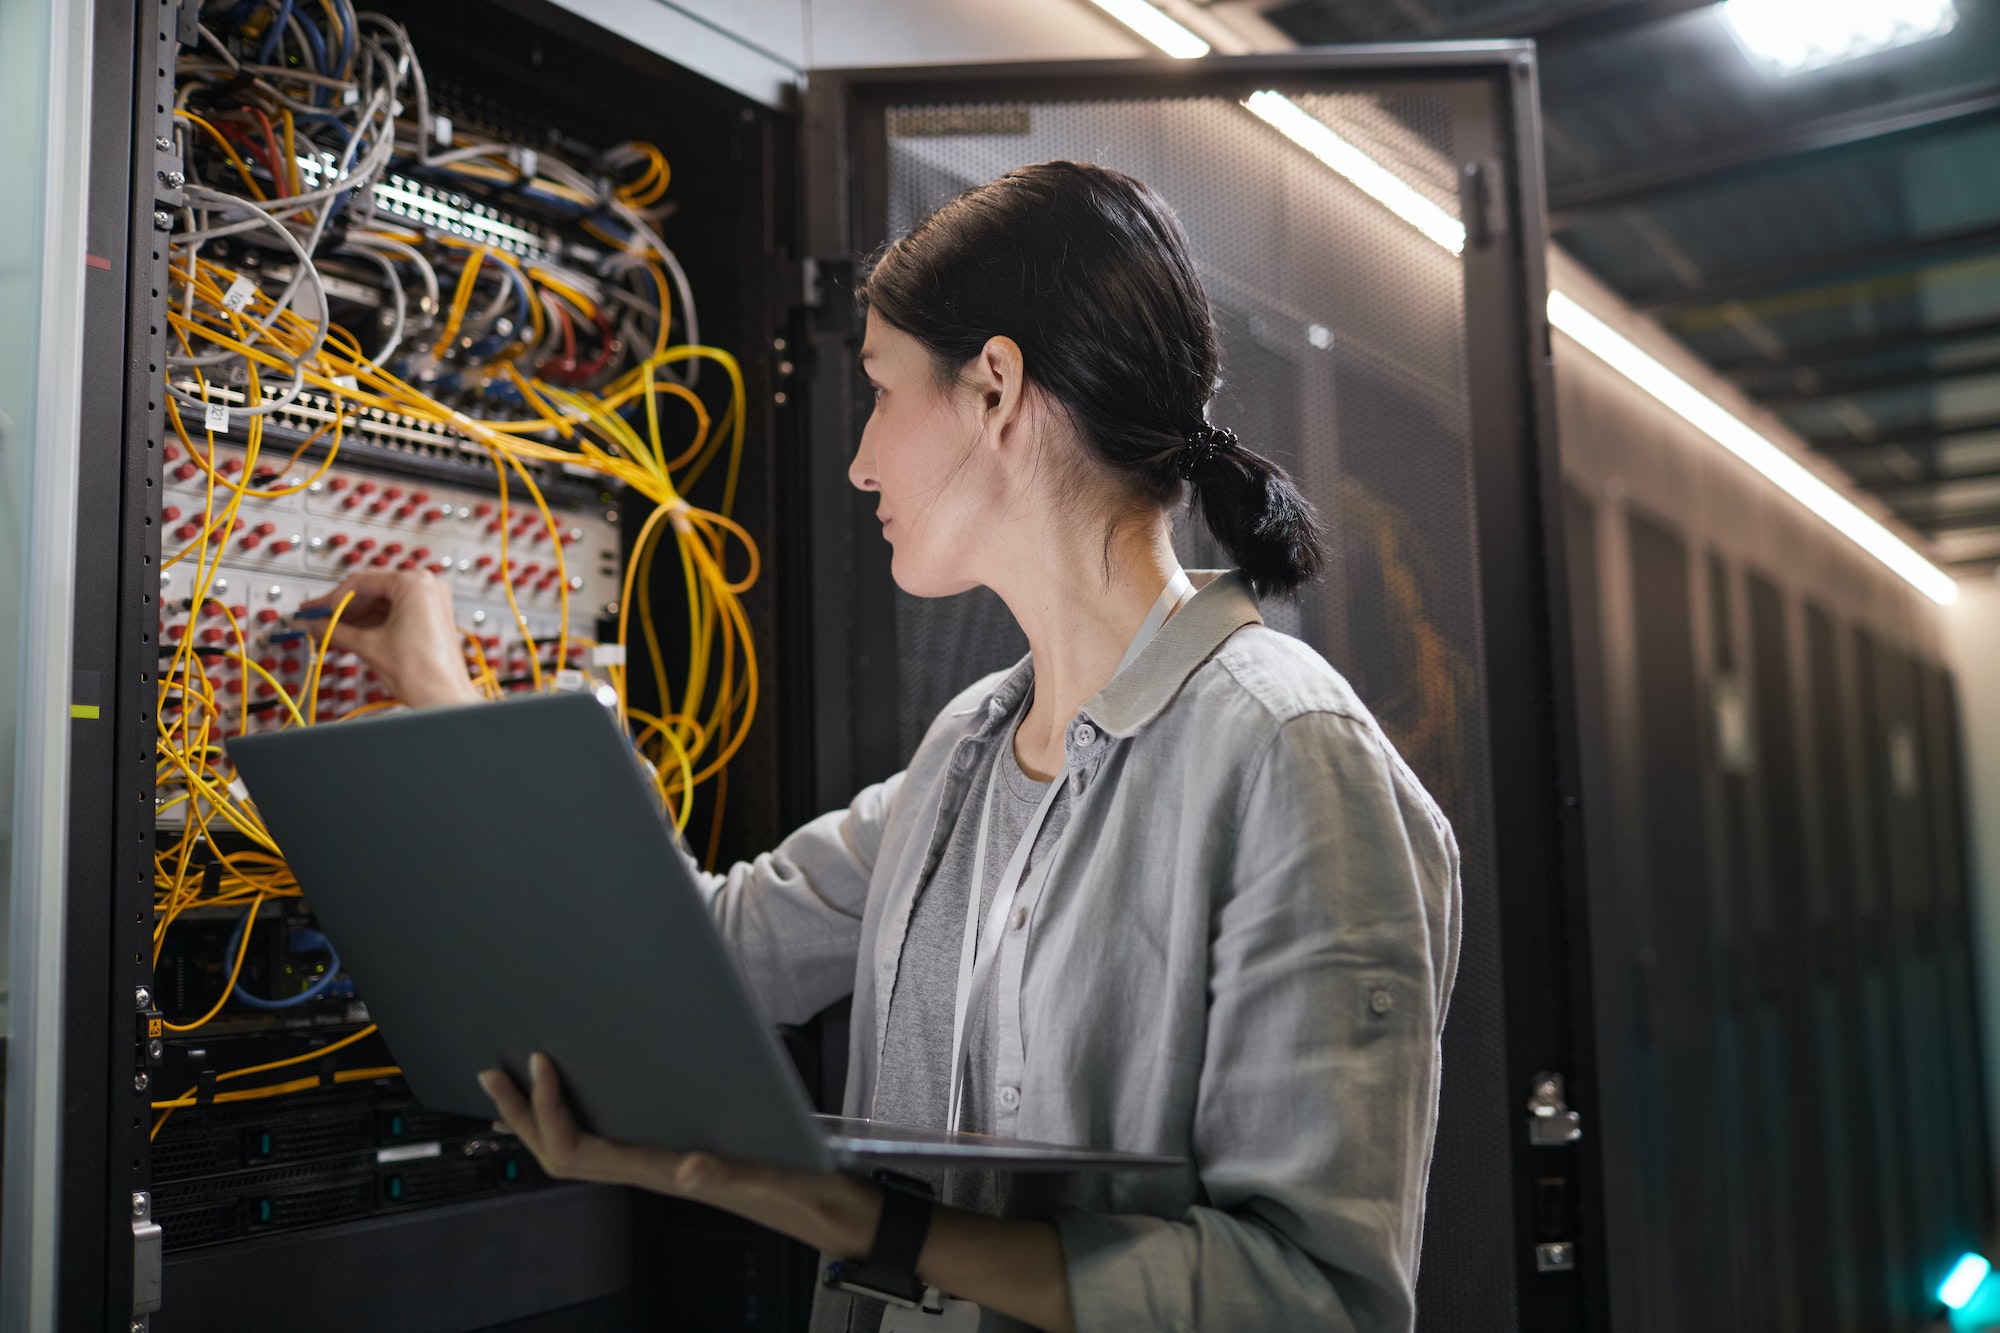 Female Network Technician Connecting Cables